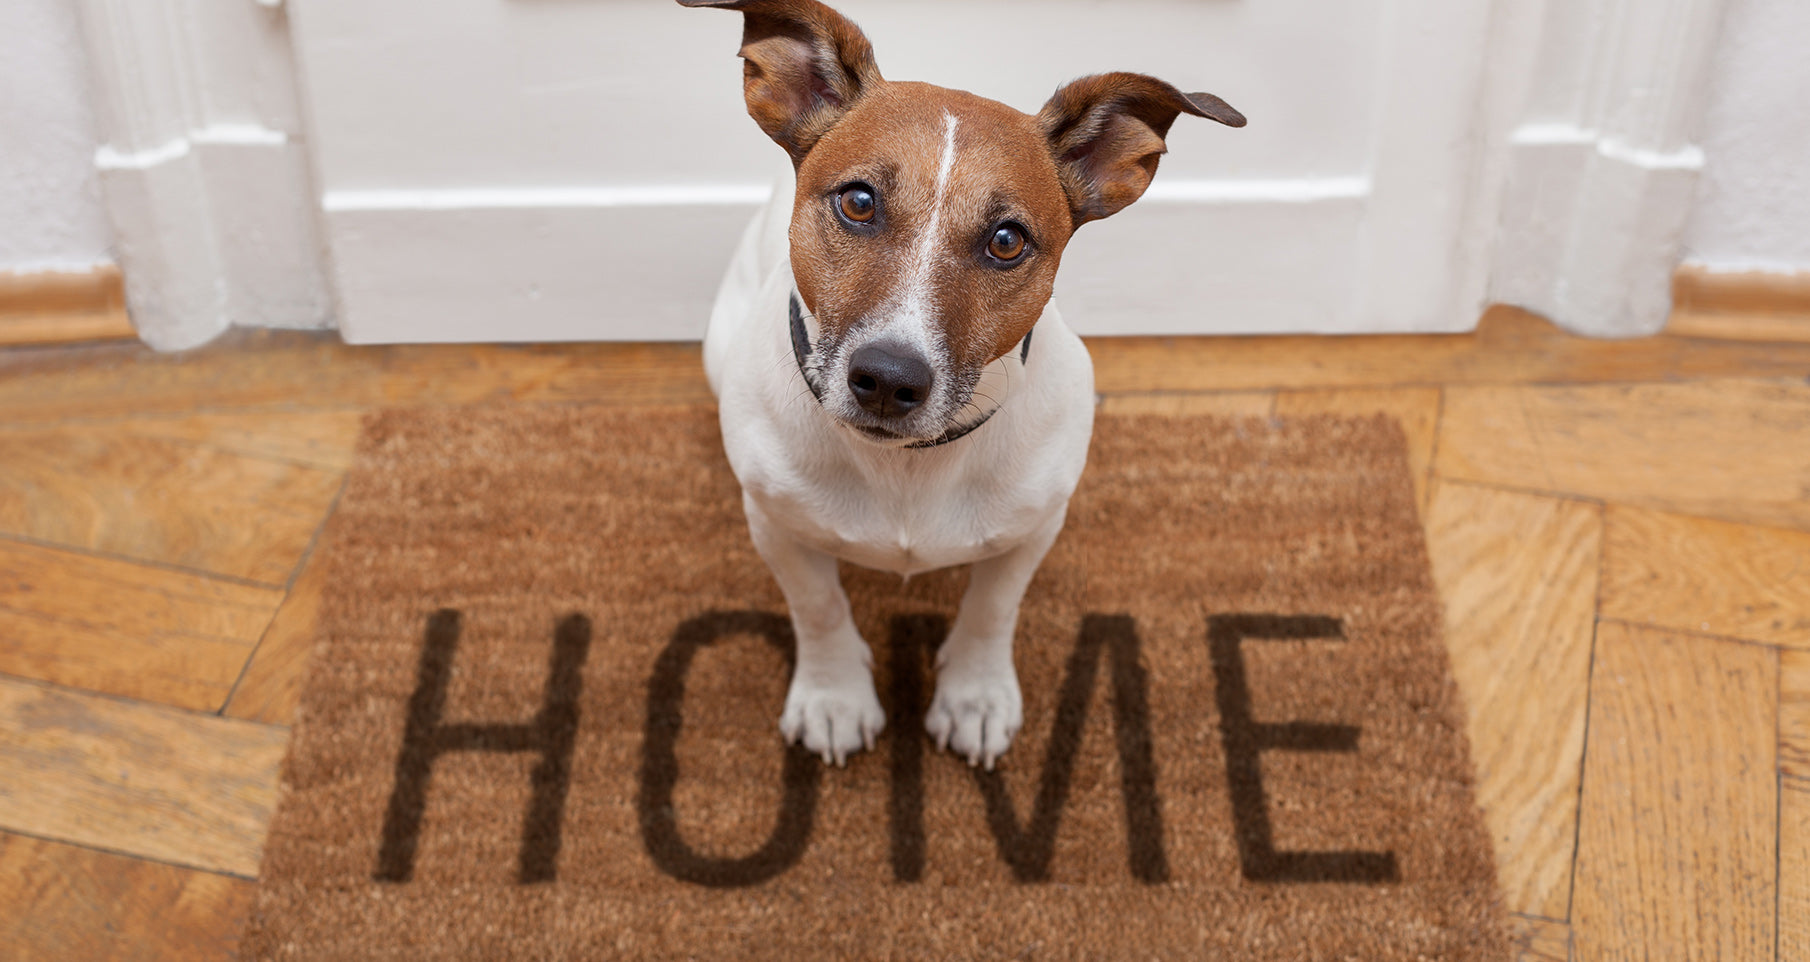 Alone Time for Dogs: How Much Is Too Much? – American Kennel Club